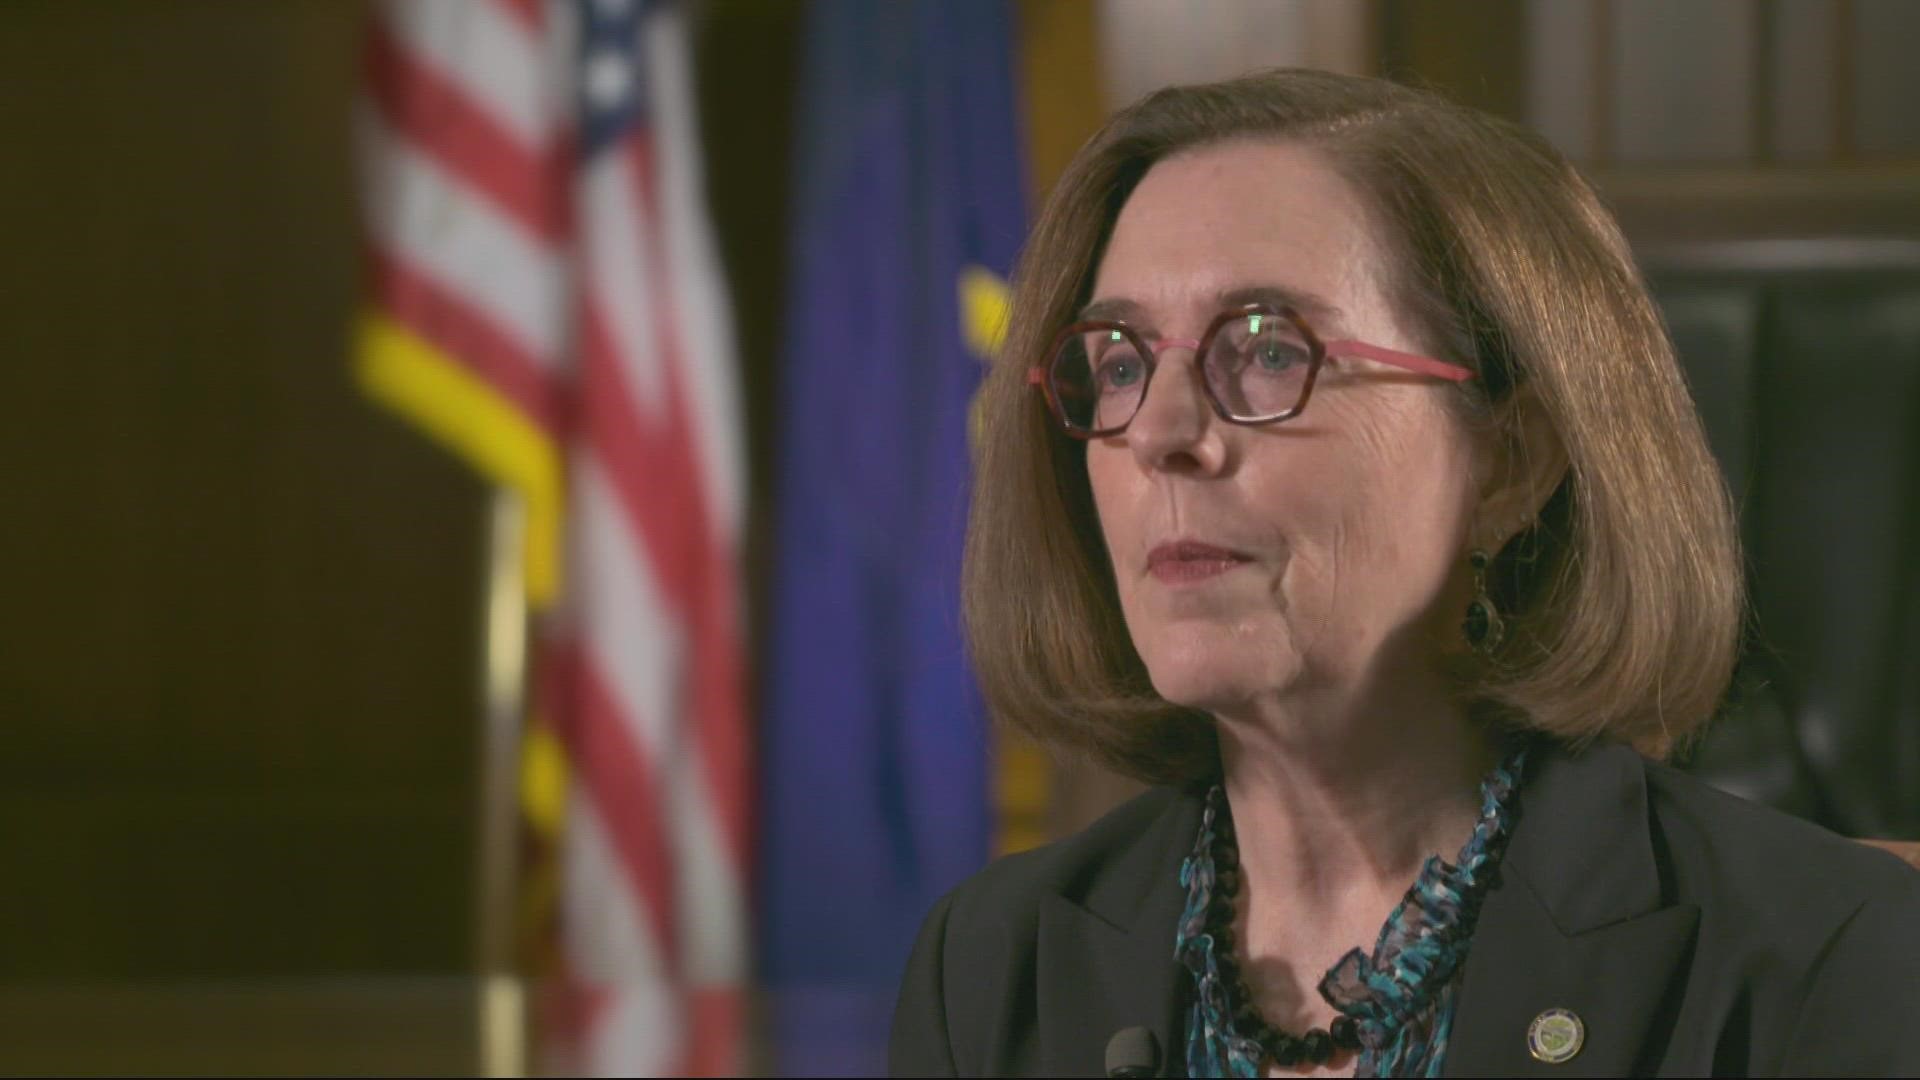 Oregon Governor Kate Brown sat down with KGW's Cristin Severance to discuss vaccine mandates, face mask requirements, the recent heat wave and more.